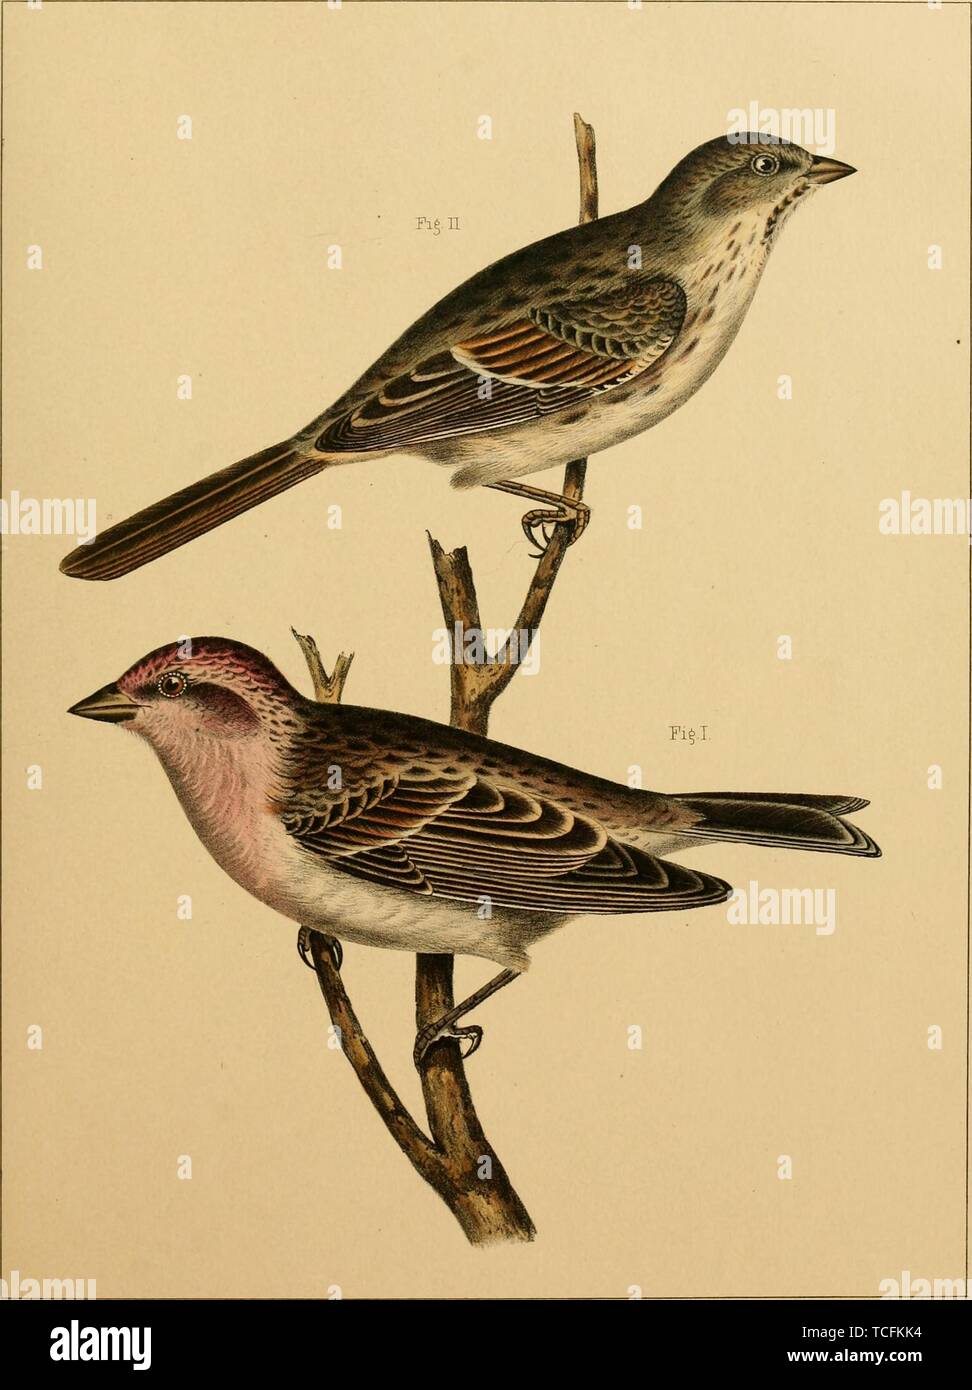 Engraved drawing of the Painted Finch (Emblema pictum) and Lincoln's Sparrow (Melospiza lincolnii), from the book 'Reports of explorations and surveys' by Joseph Henry and Spencer Fullerton Baird, 1855. Courtesy Internet Archive. () Stock Photo